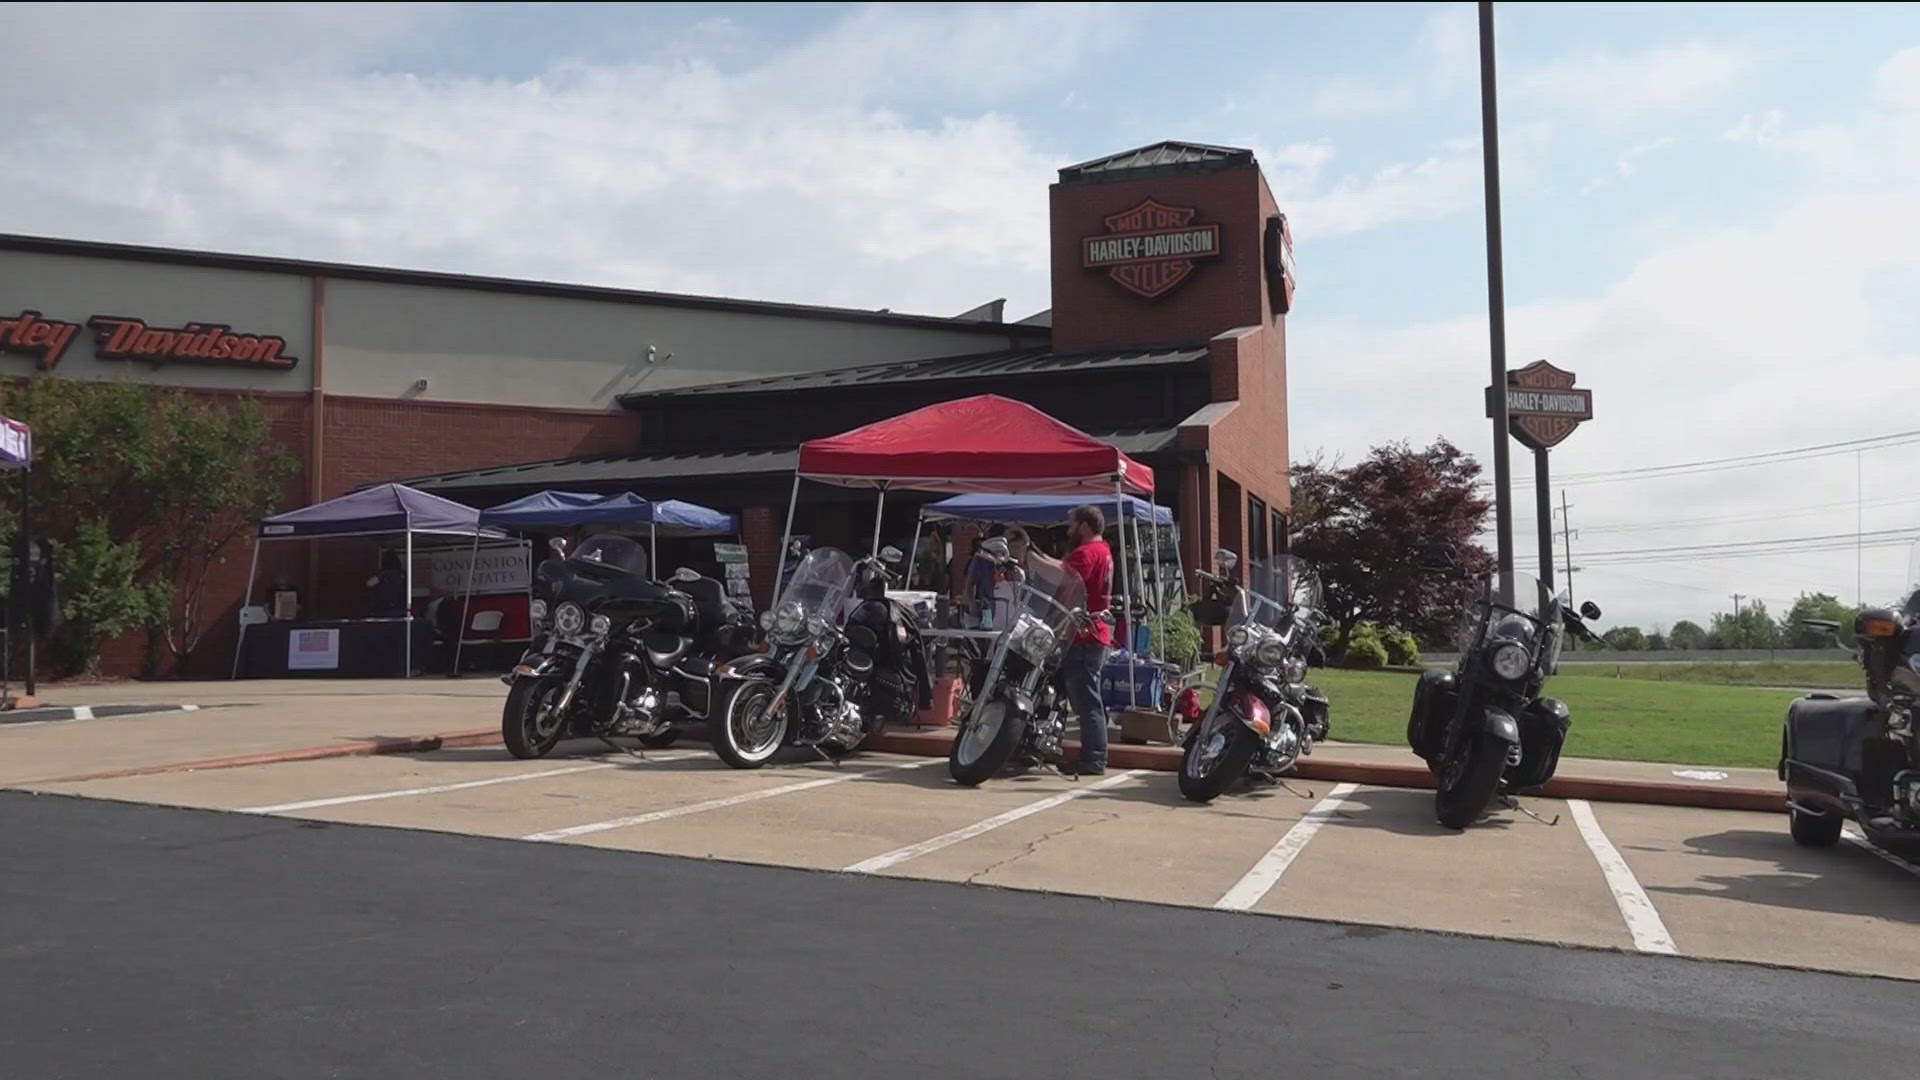 STEEL HORSE RALLY IS DEDICATED TO "HONORING ALL WHO SERVE" BY HELPING LOCAL CHARITIES AND THE COMMUNITY...